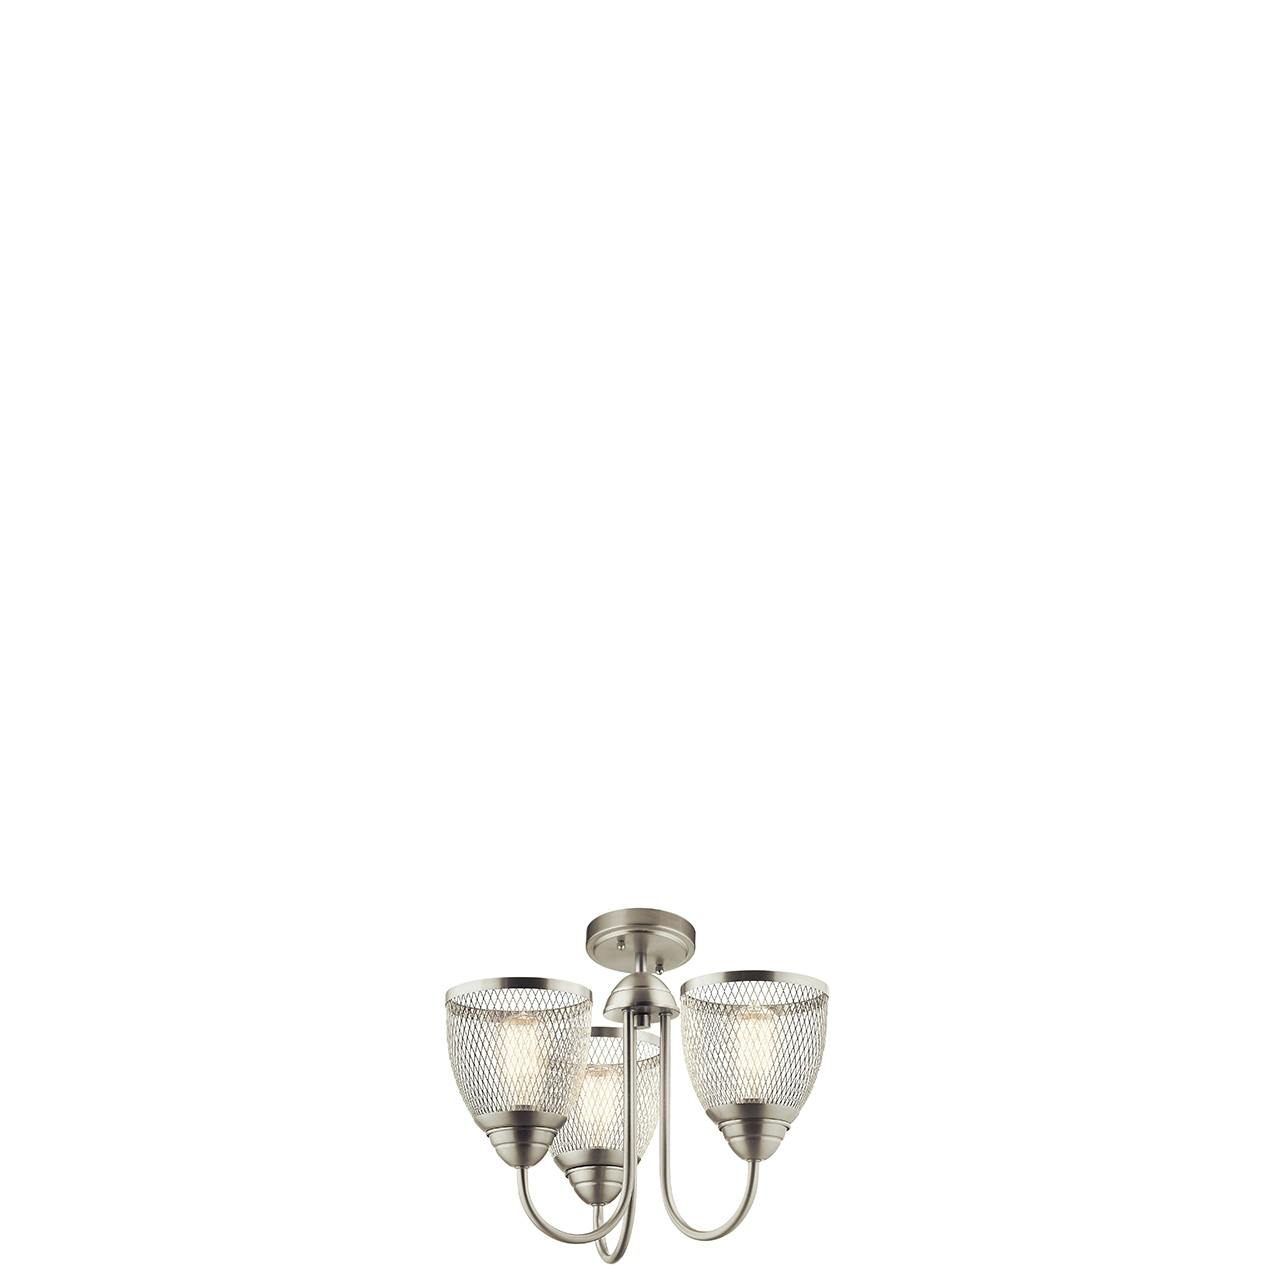 Voclain 13" Convertible Chandelier Nickel shown as a semi-flush on a white background